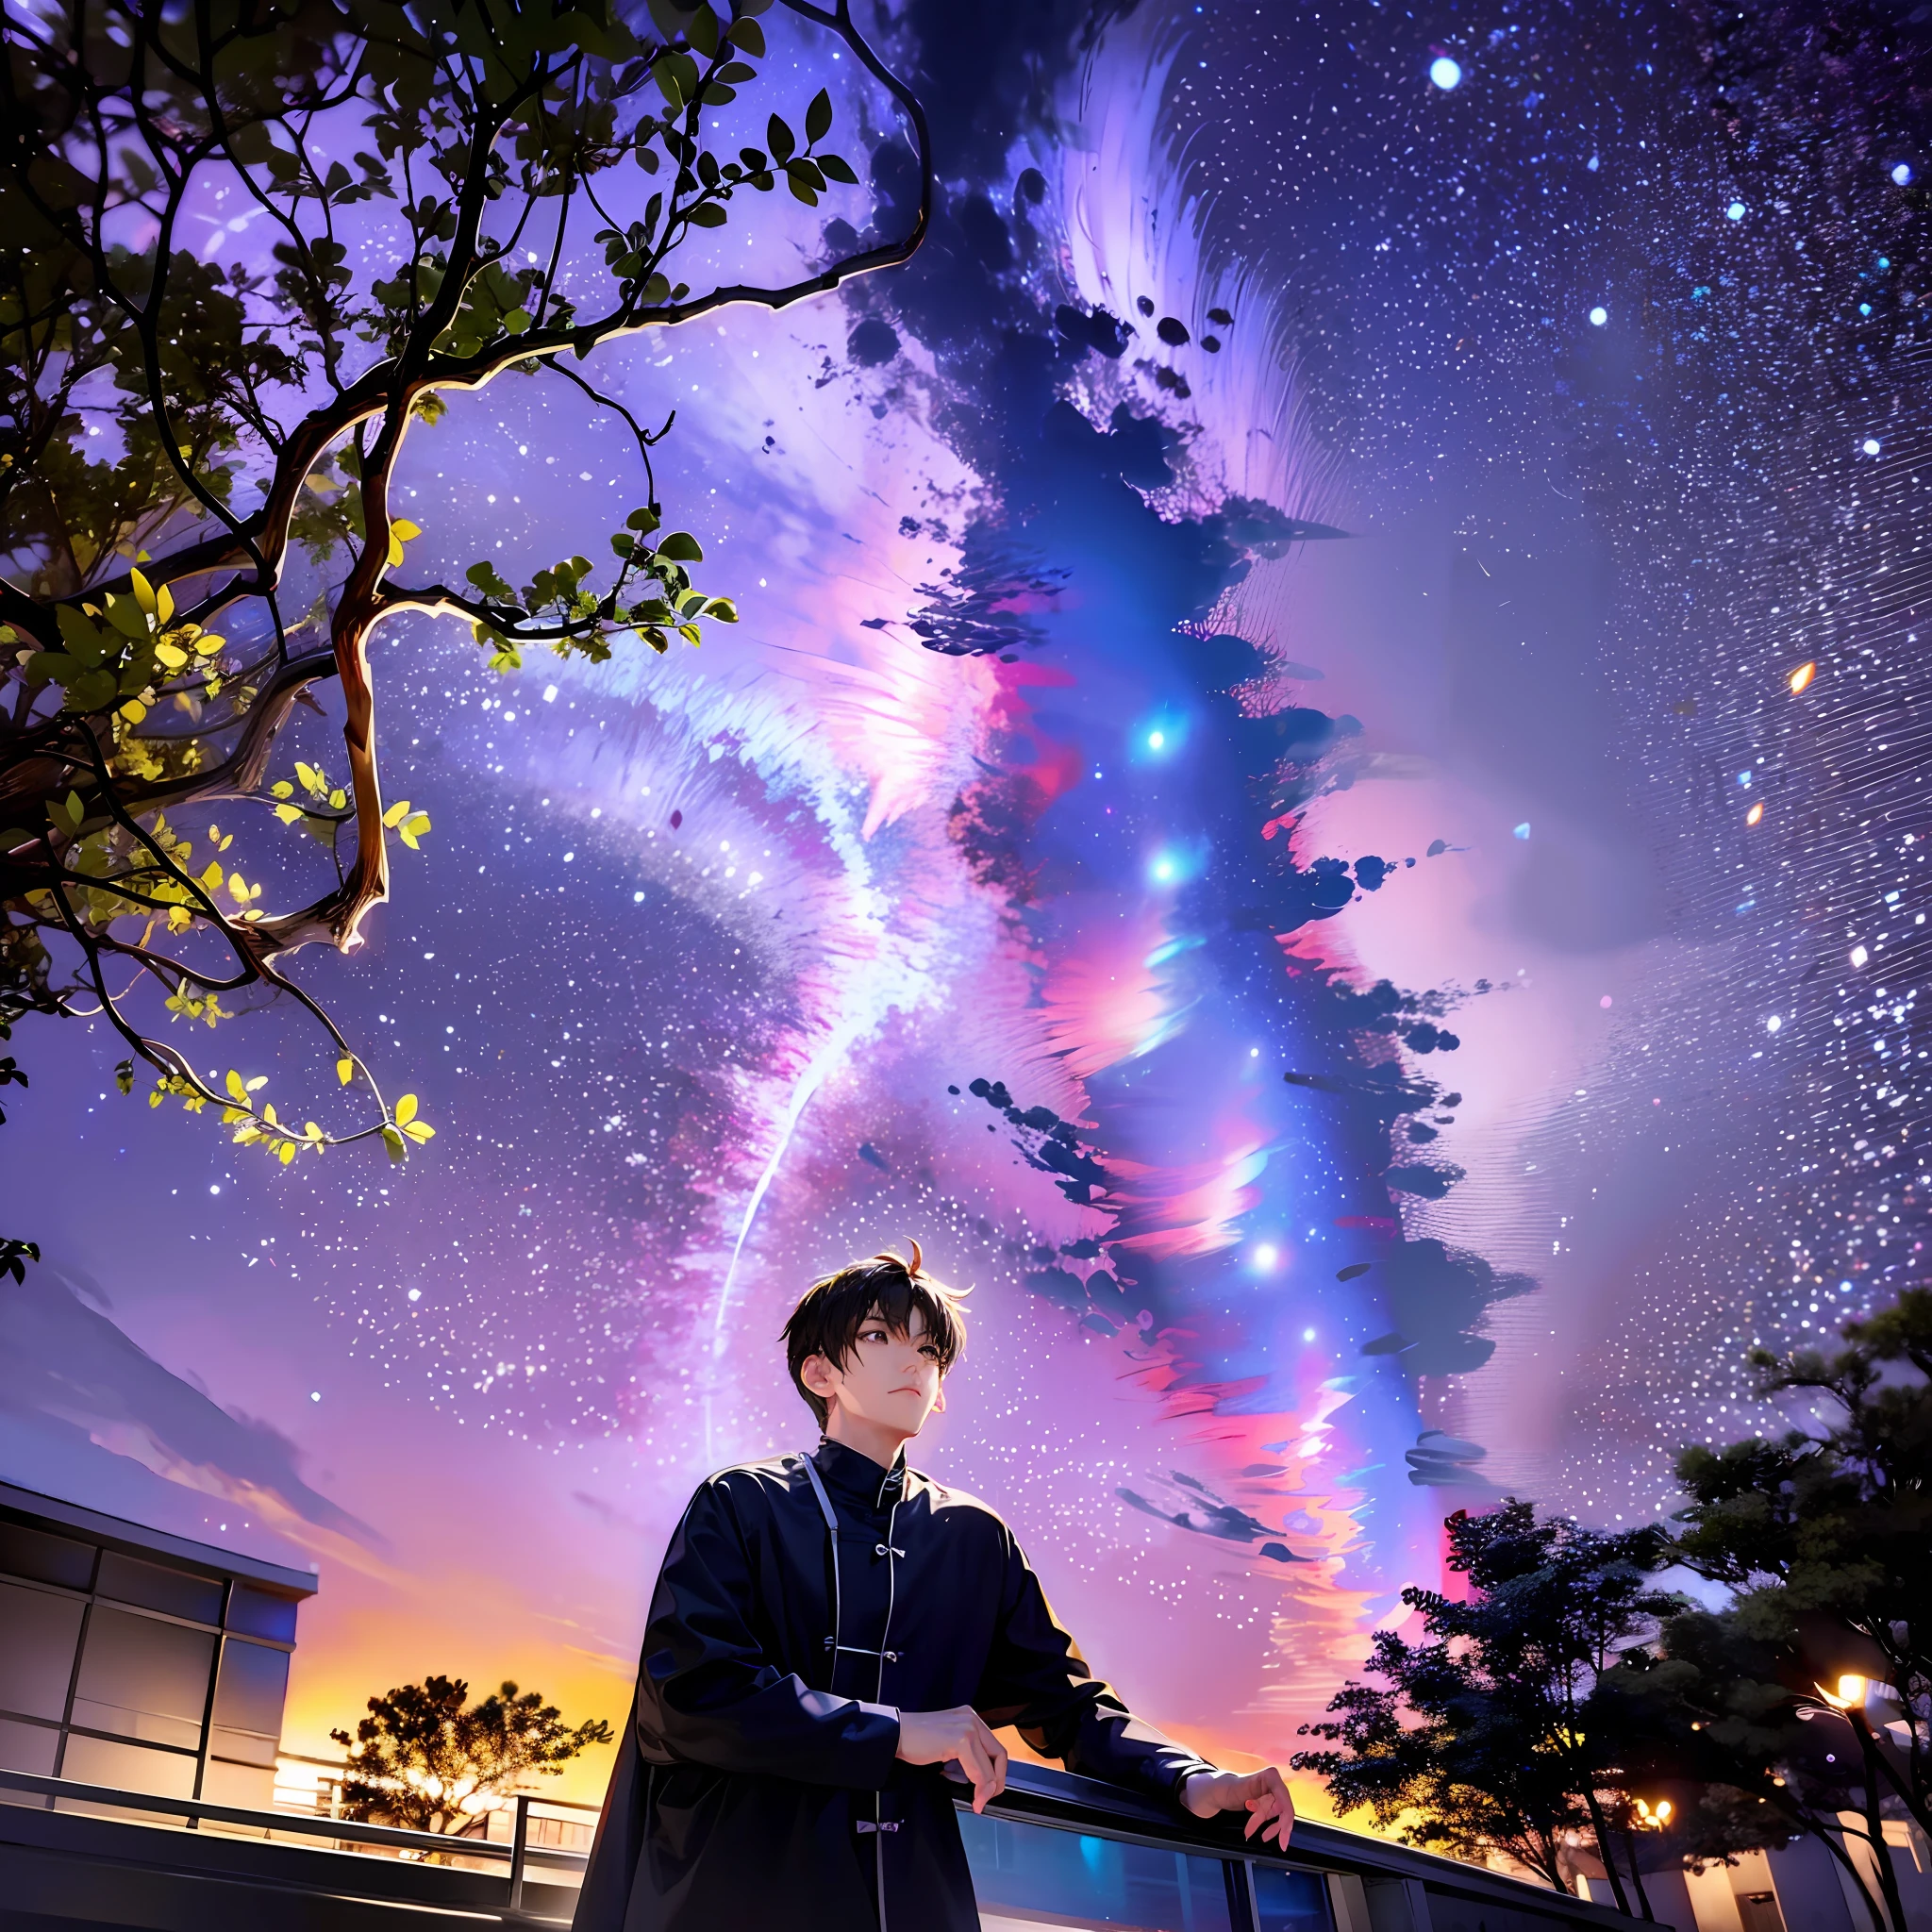 (A boy in a doctor coat sits on a chair atop a hostel roof) overlooking the mesmerizing night sky adorned with (glowing stars, galaxies, and the Octans constellation). The scene is enhanced by the presence of a (radiant blue moon). There is moon light . There are large tall green trees. Boy is looking atthe sky. octans, sky, star (sky), scenery, starry sky, night, night sky, solo, outdoors, building, cloud, milky way, sitting, tree, city, silhouette, cityscape